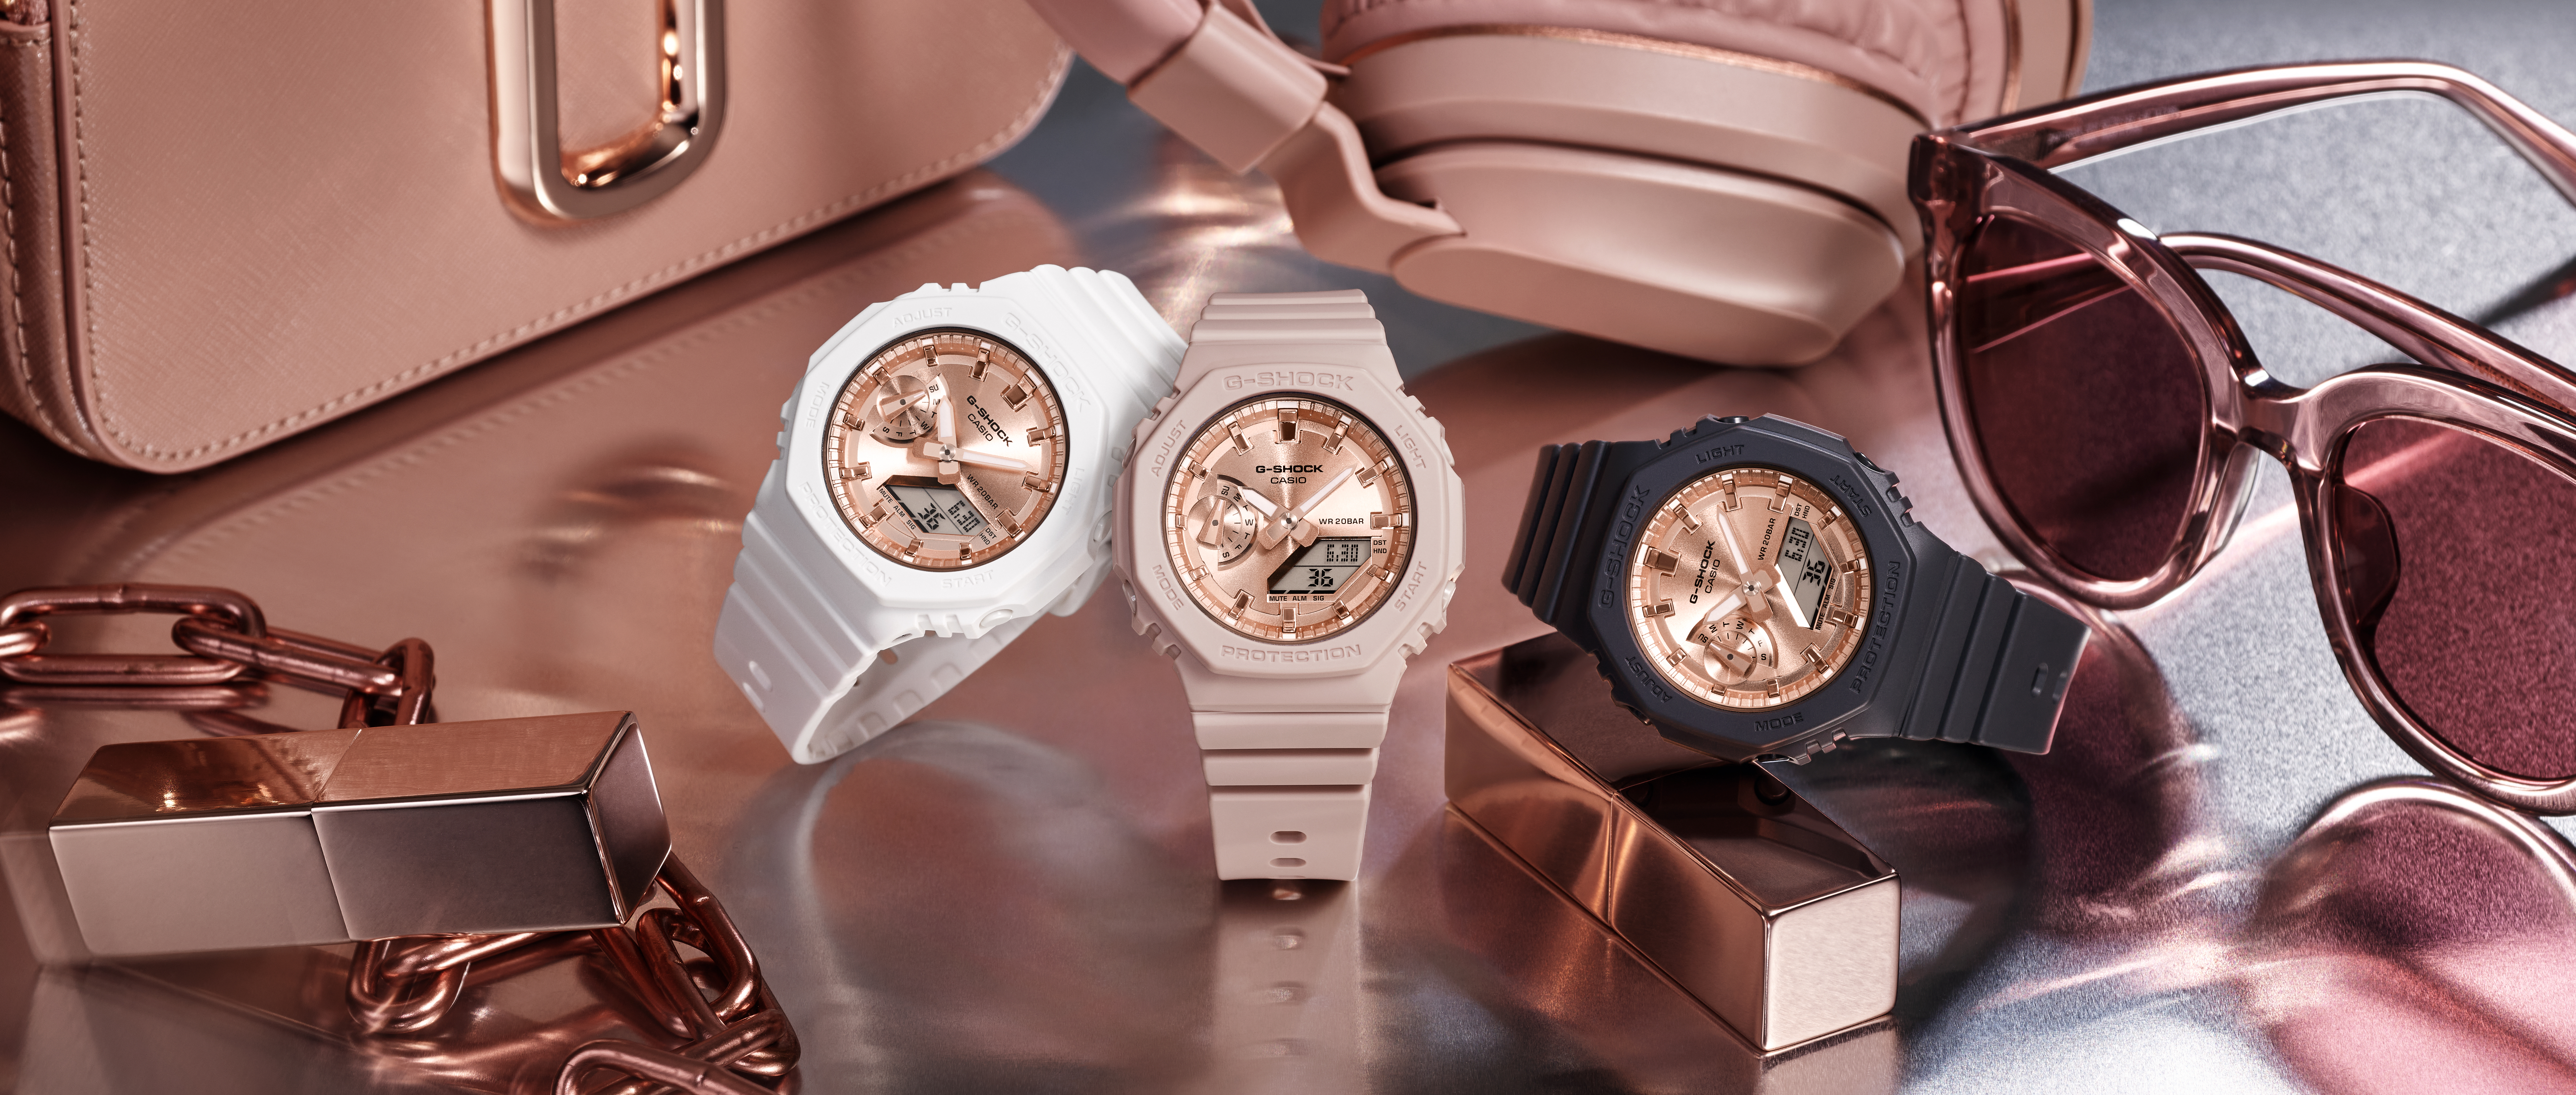 Go cool, classy or both with G-SHOCK!